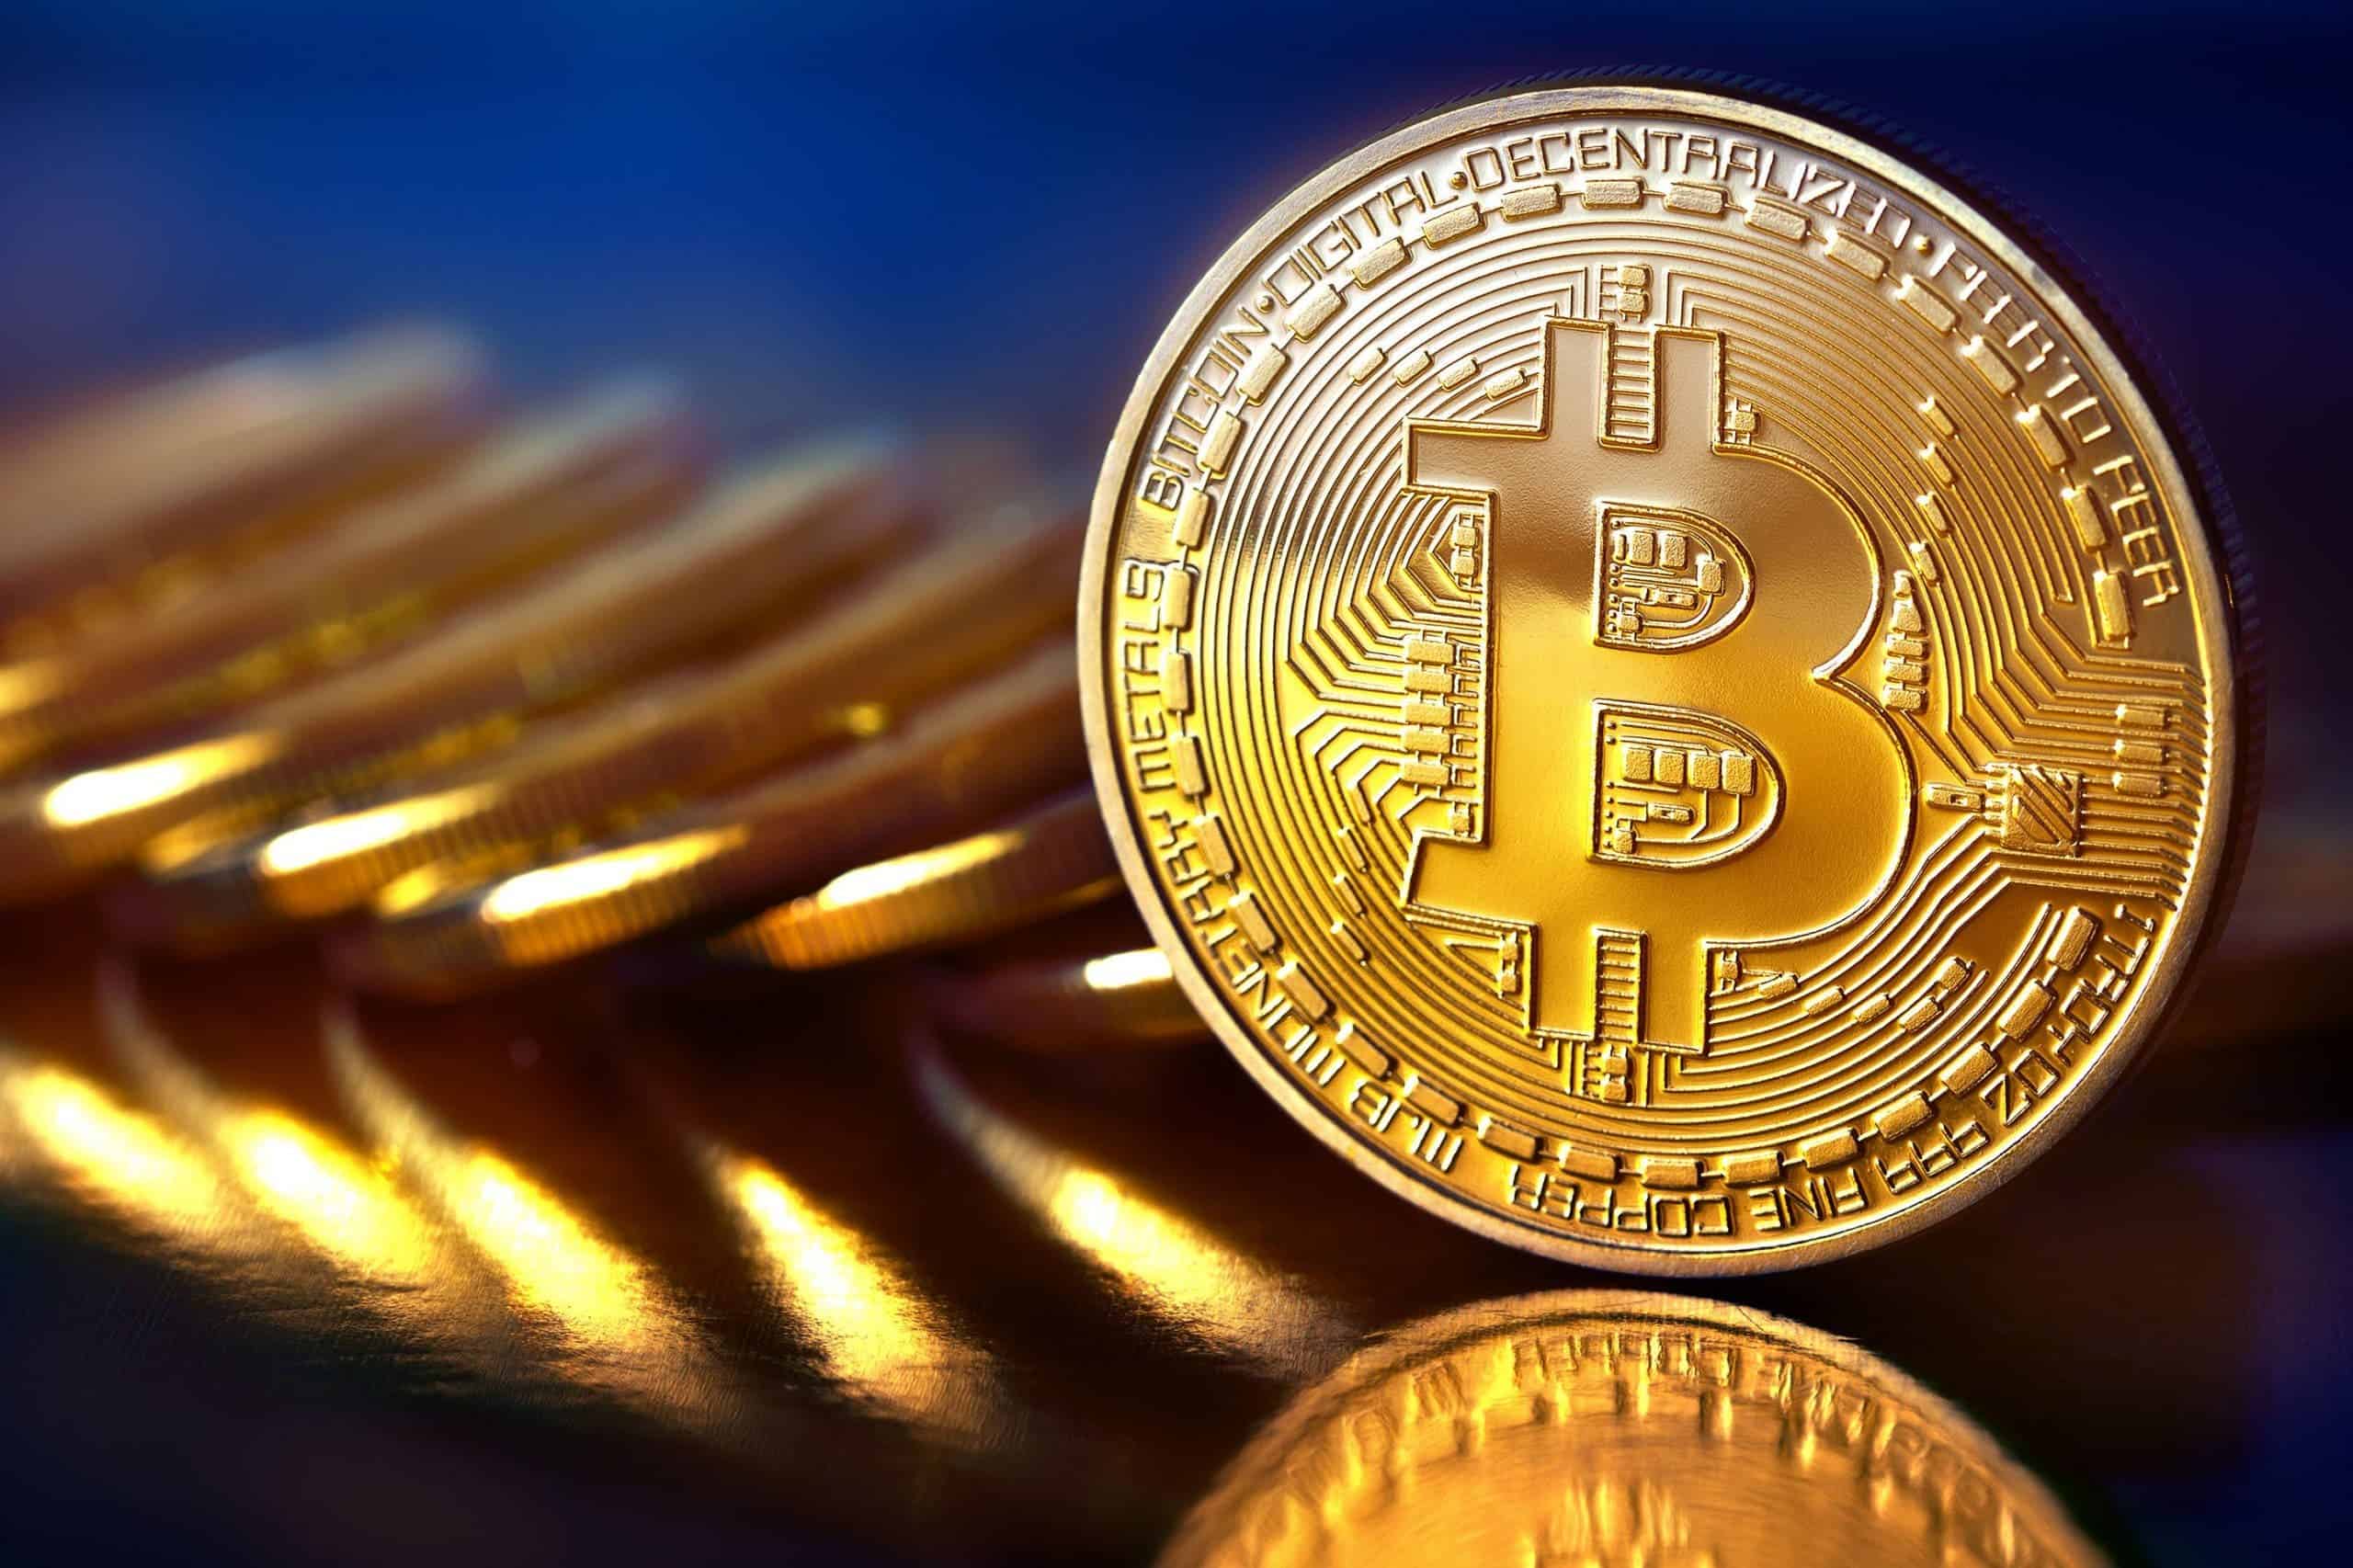 Bitcoin falls below the $20,000 mark for the first time since December 2020